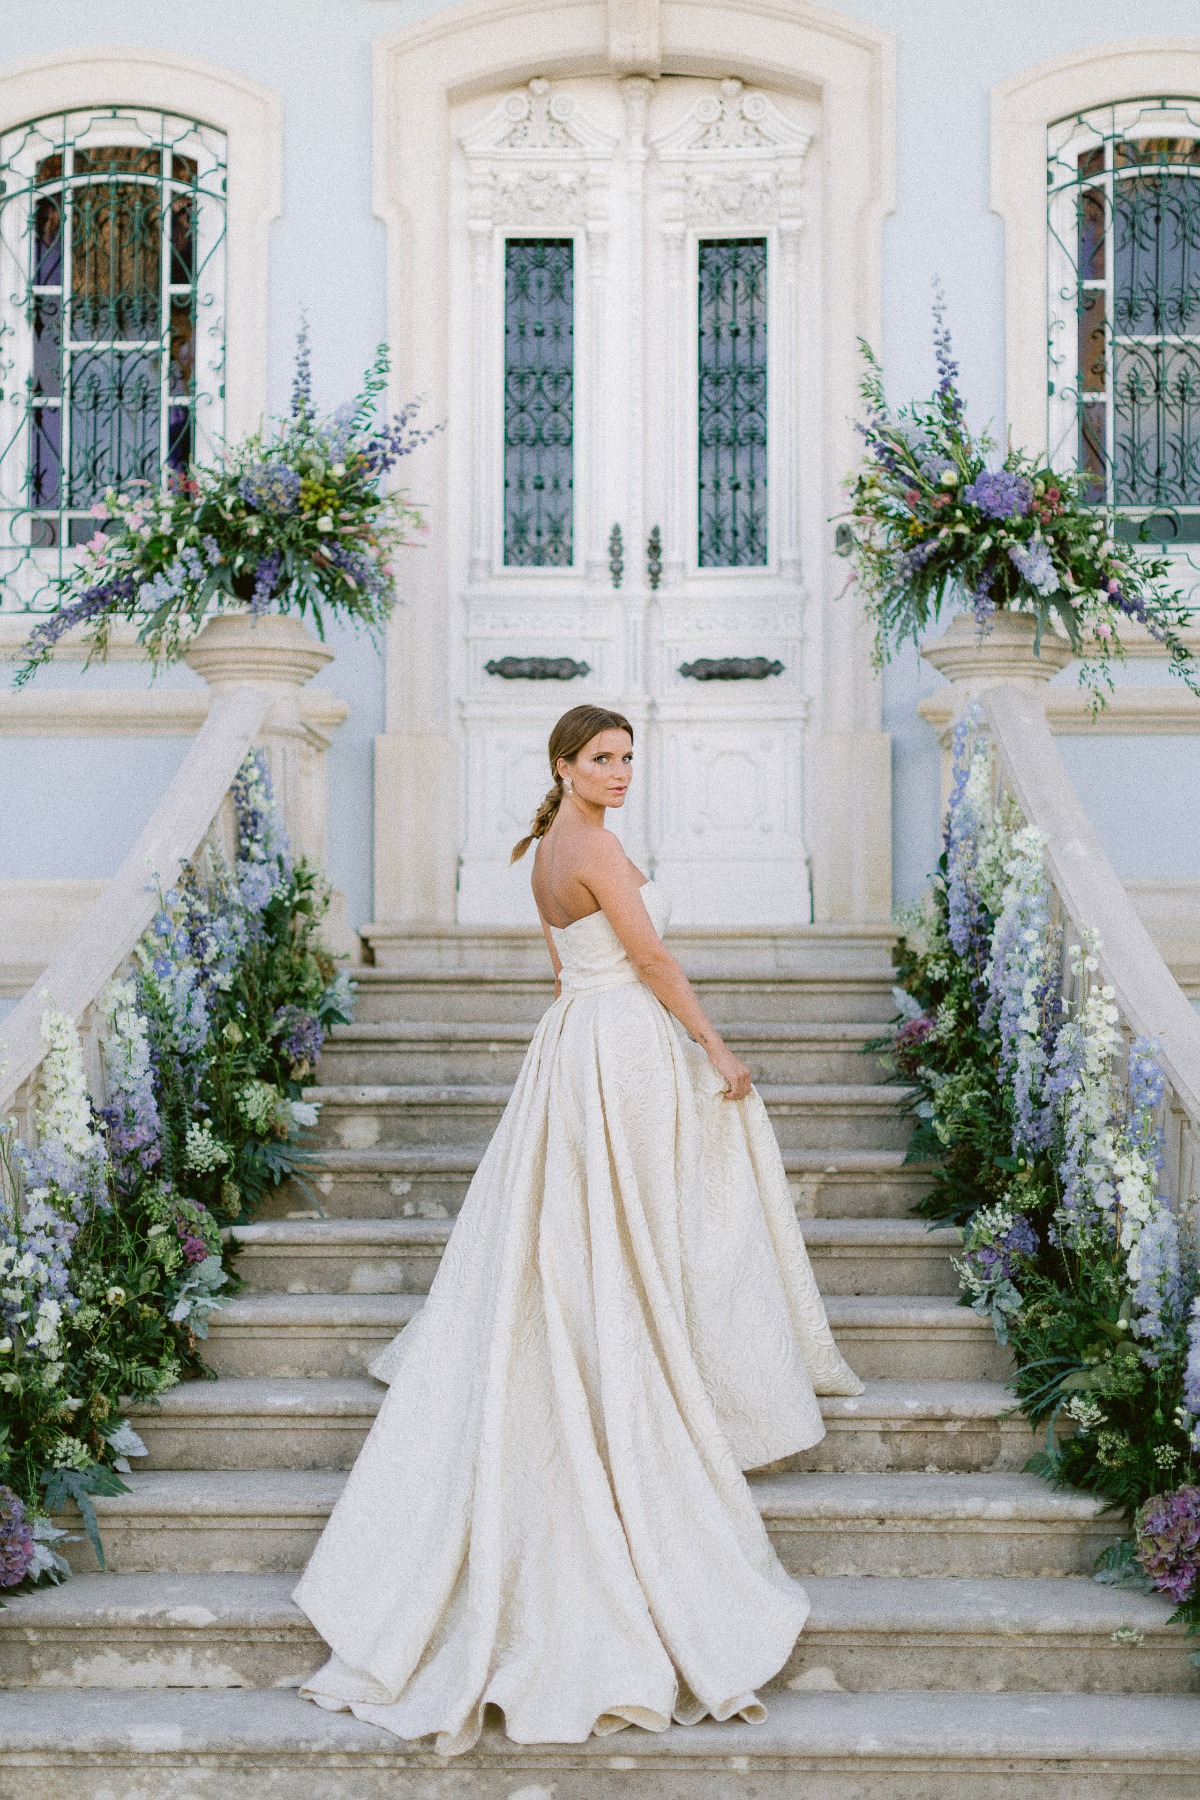 Gio Rodrigues brocade wedding gown